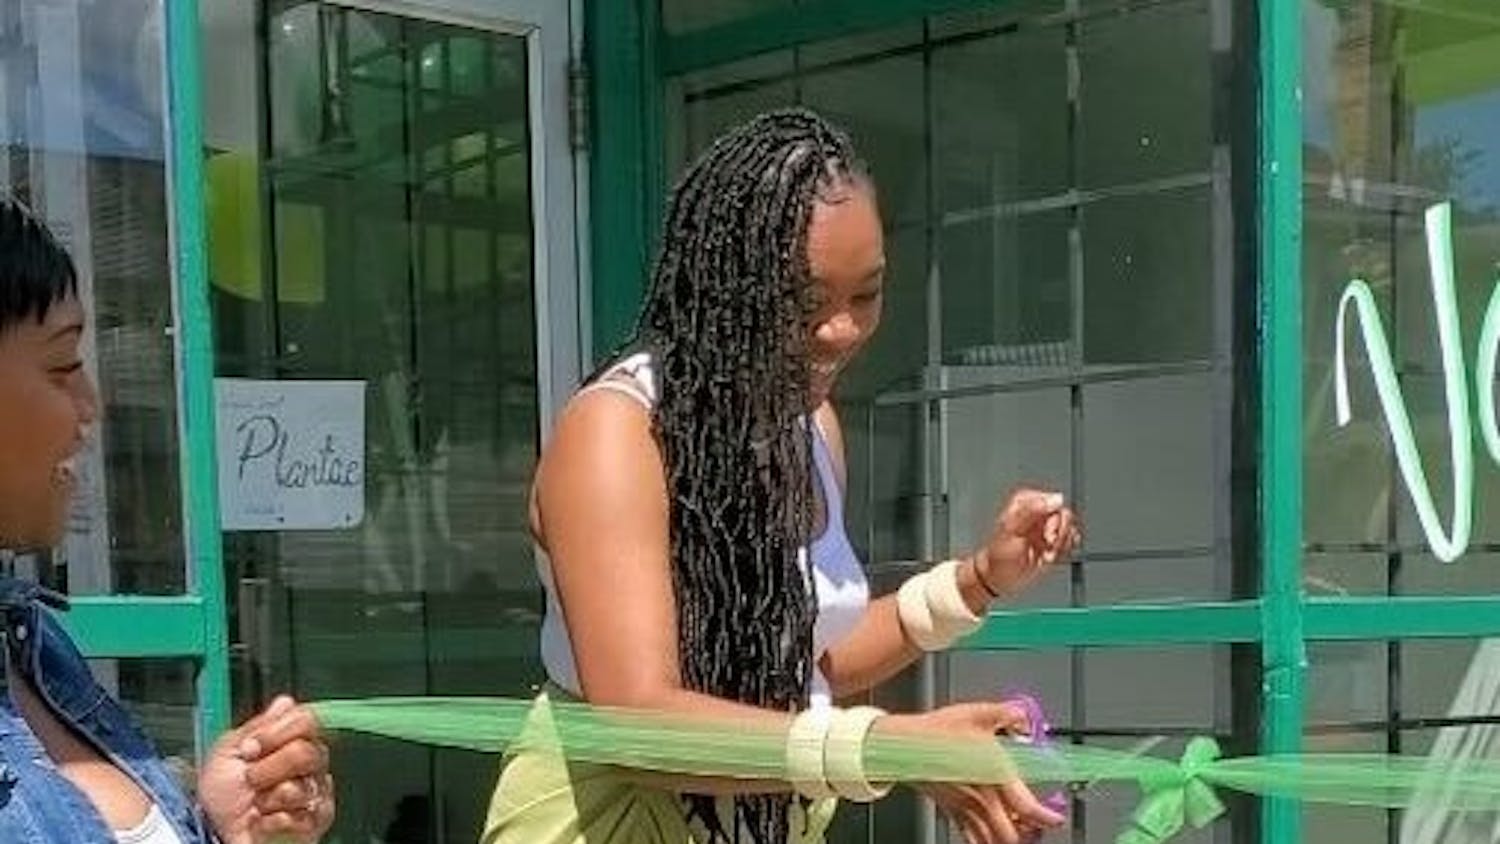 Donisha Gant, owner of Plantae, cuts the ribbon at her store’s grand opening ceremony. &nbsp;